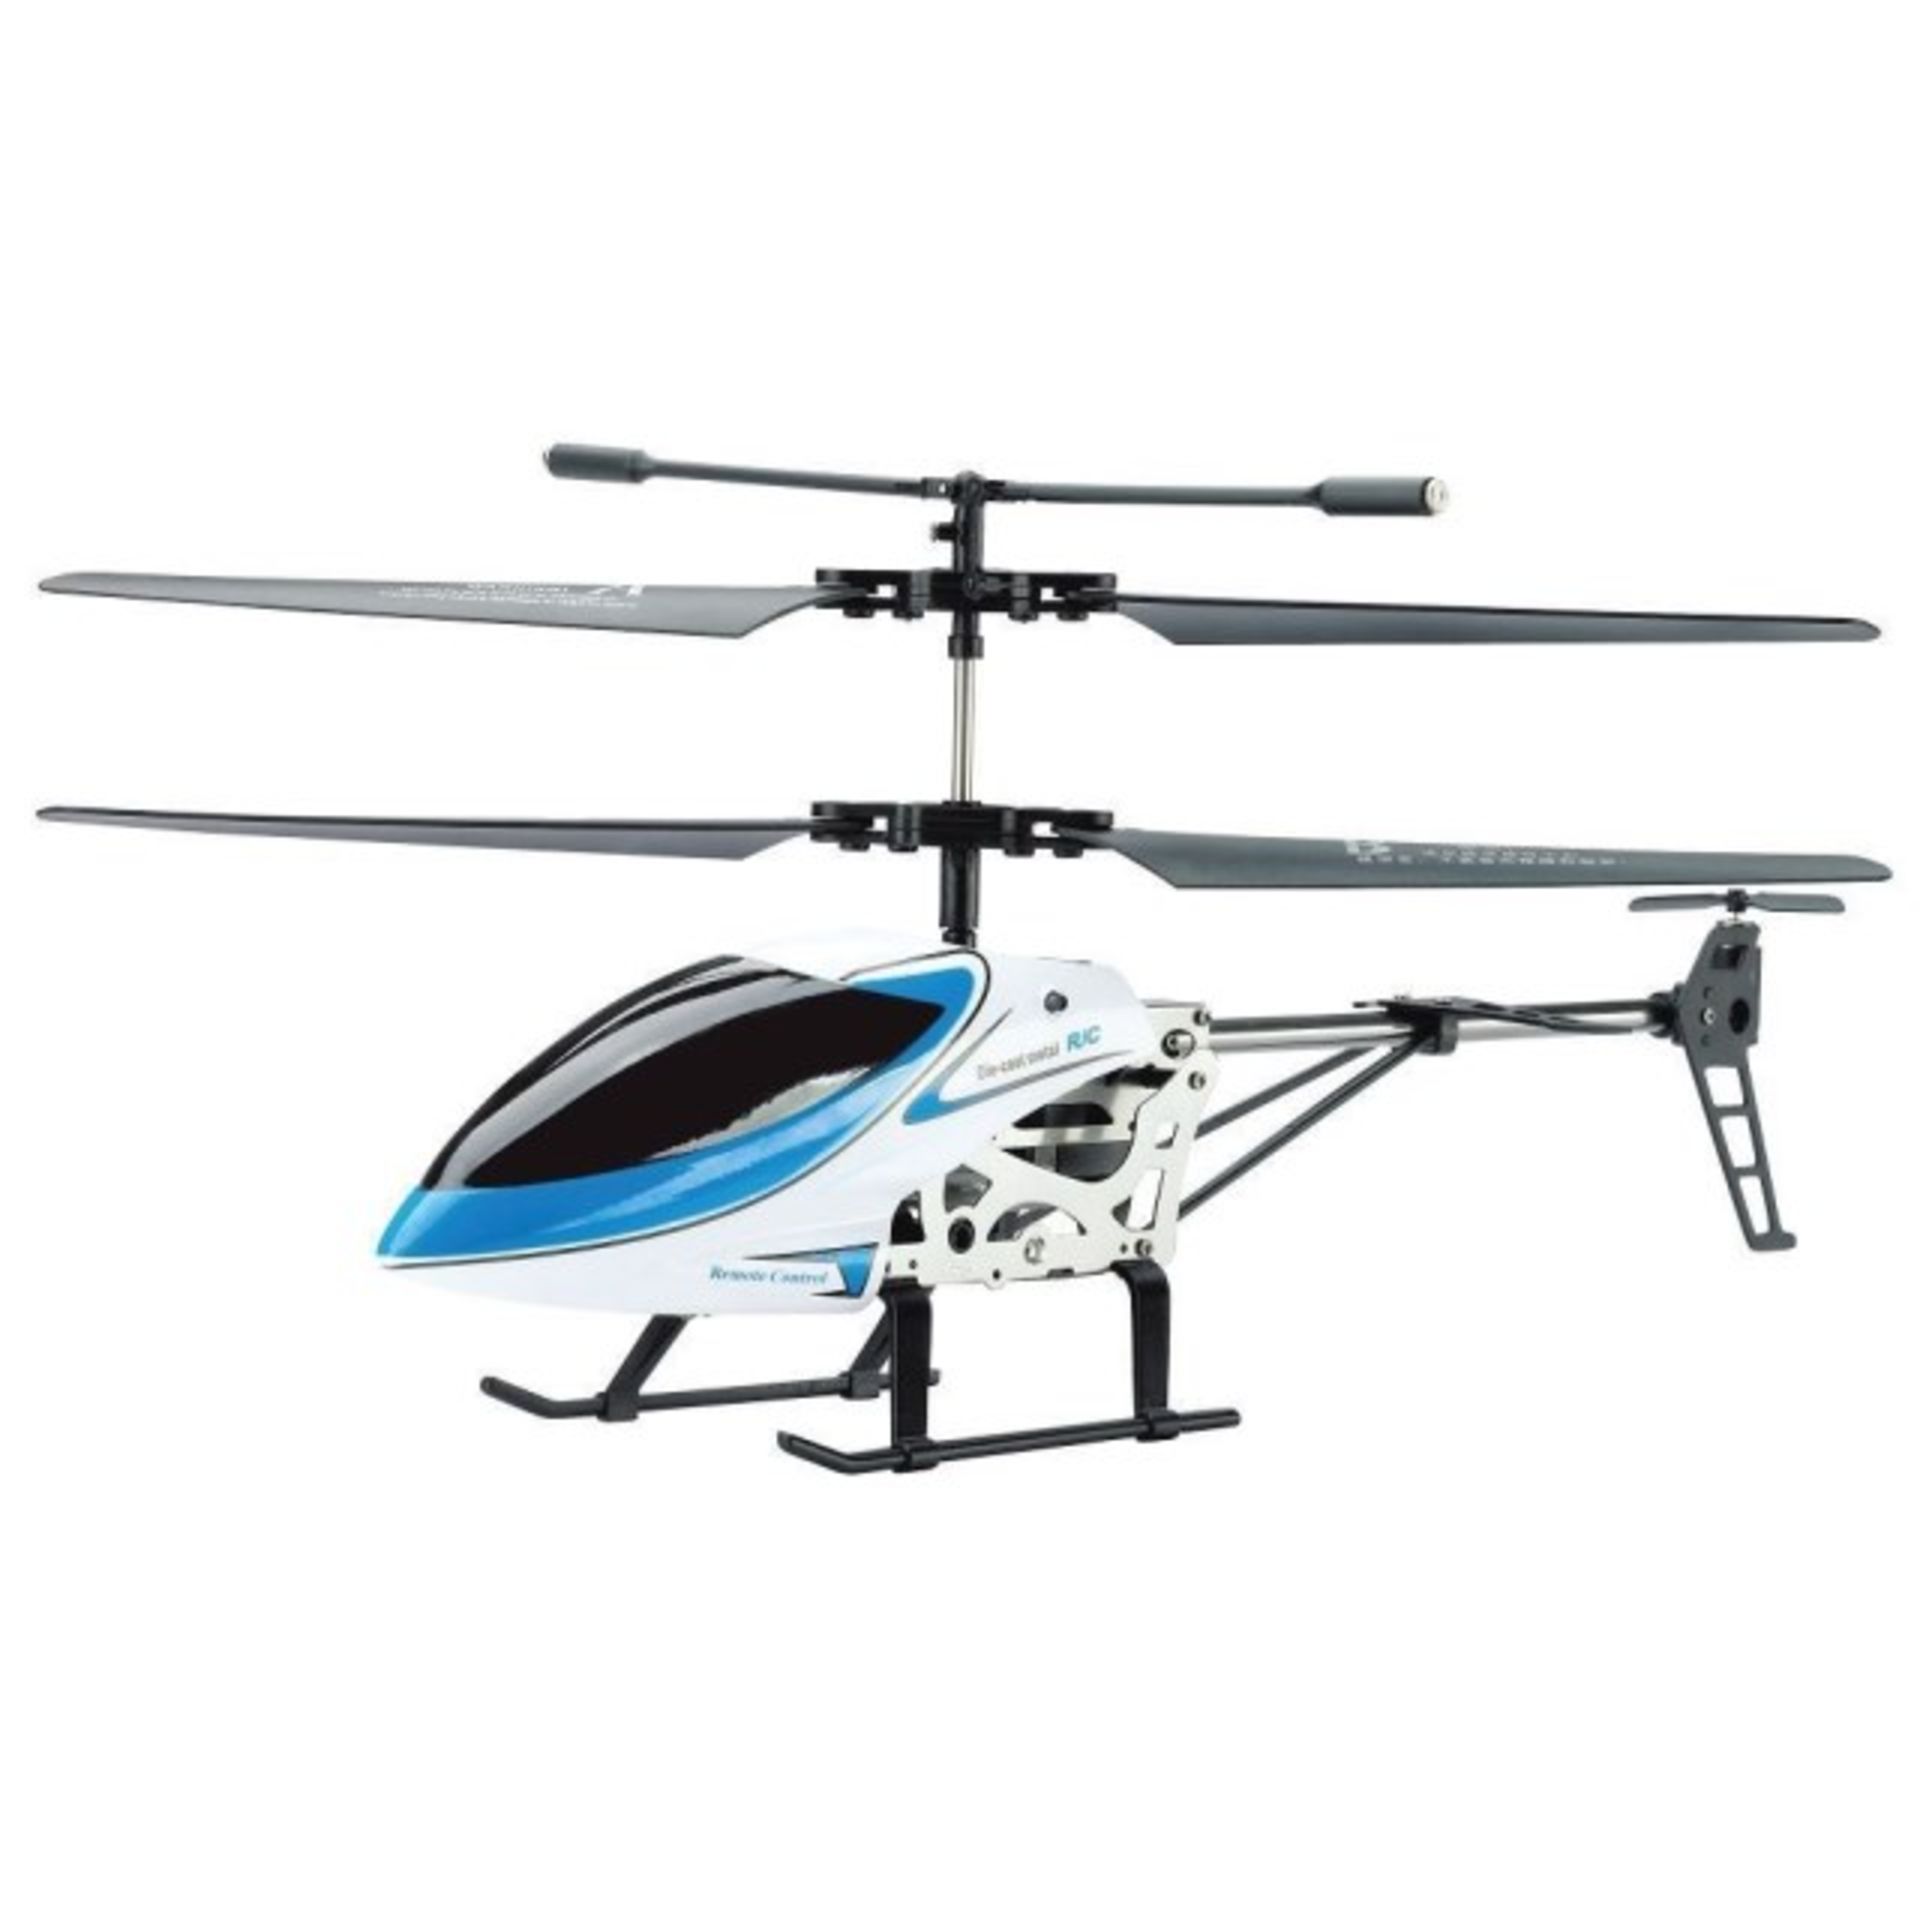 V Brand New 3.5 Channel Infra-Red Control Helicopter Super Steady Rotor Blade System RRP £29.99